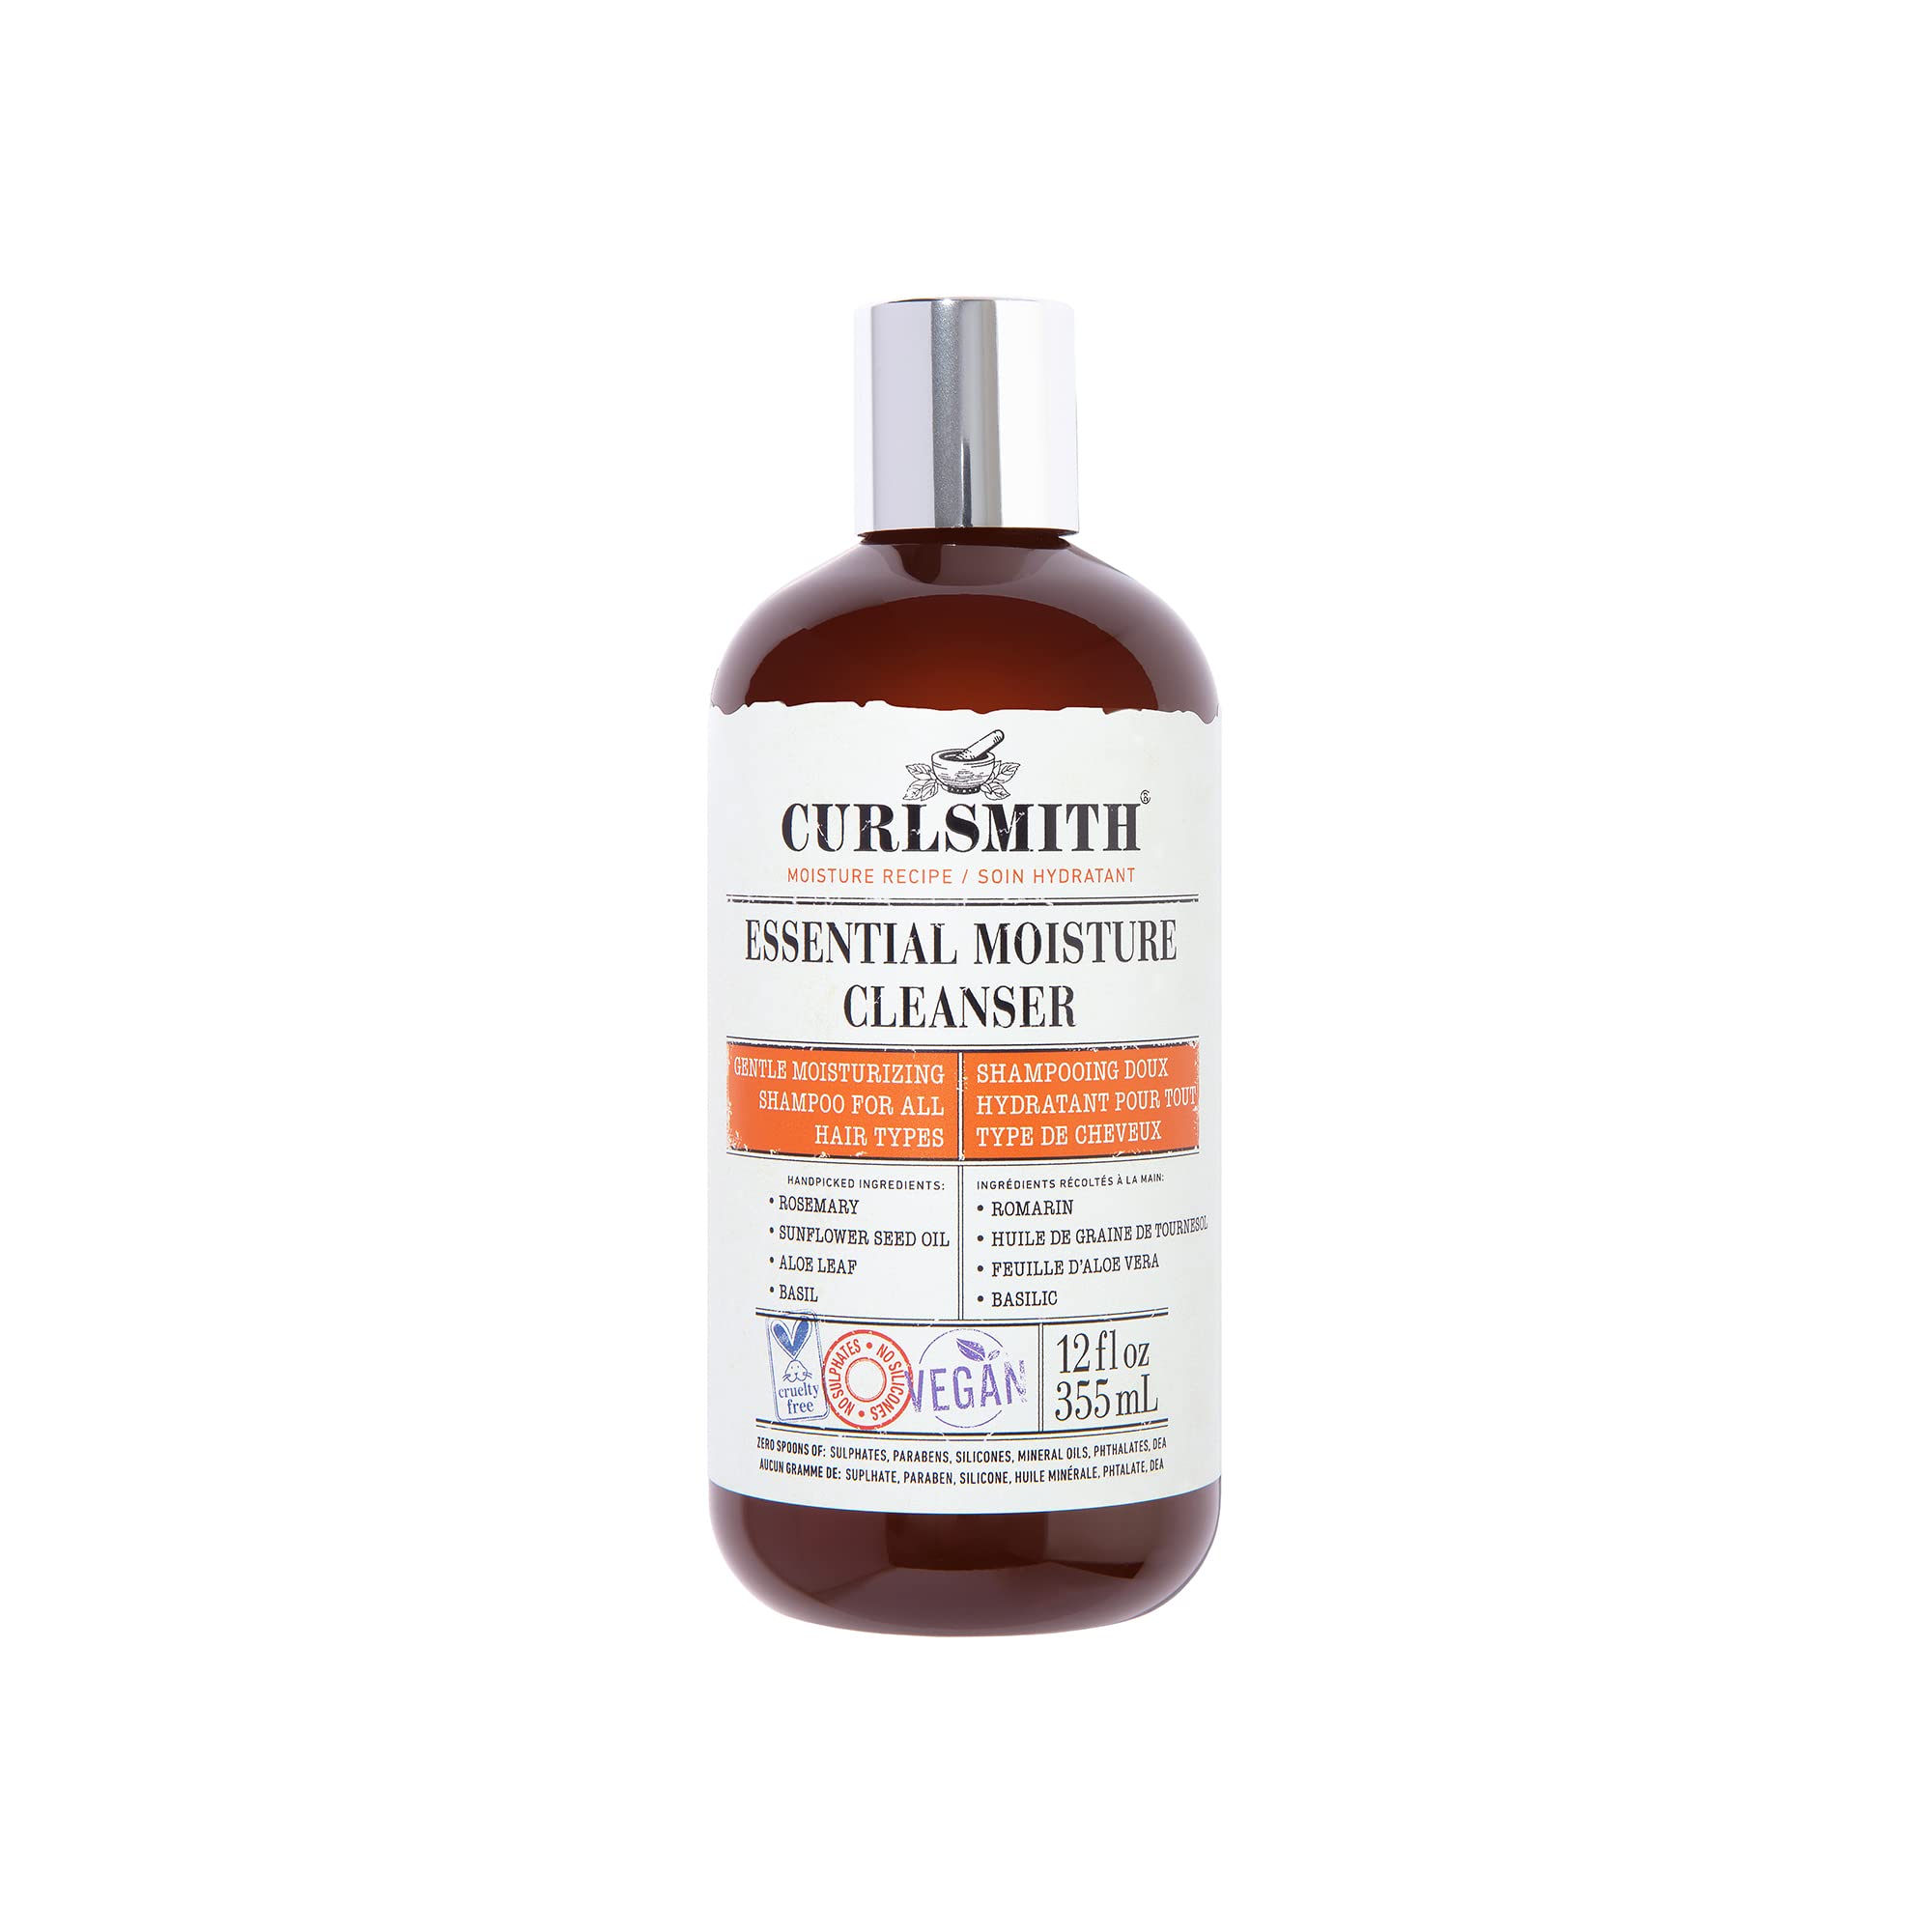 CURLSMITH - Essential Moisture Cleanser, Gentle Nourishing Shampoo for Wavy, Curly and Coily Hair, Vegan (12 FL Oz)